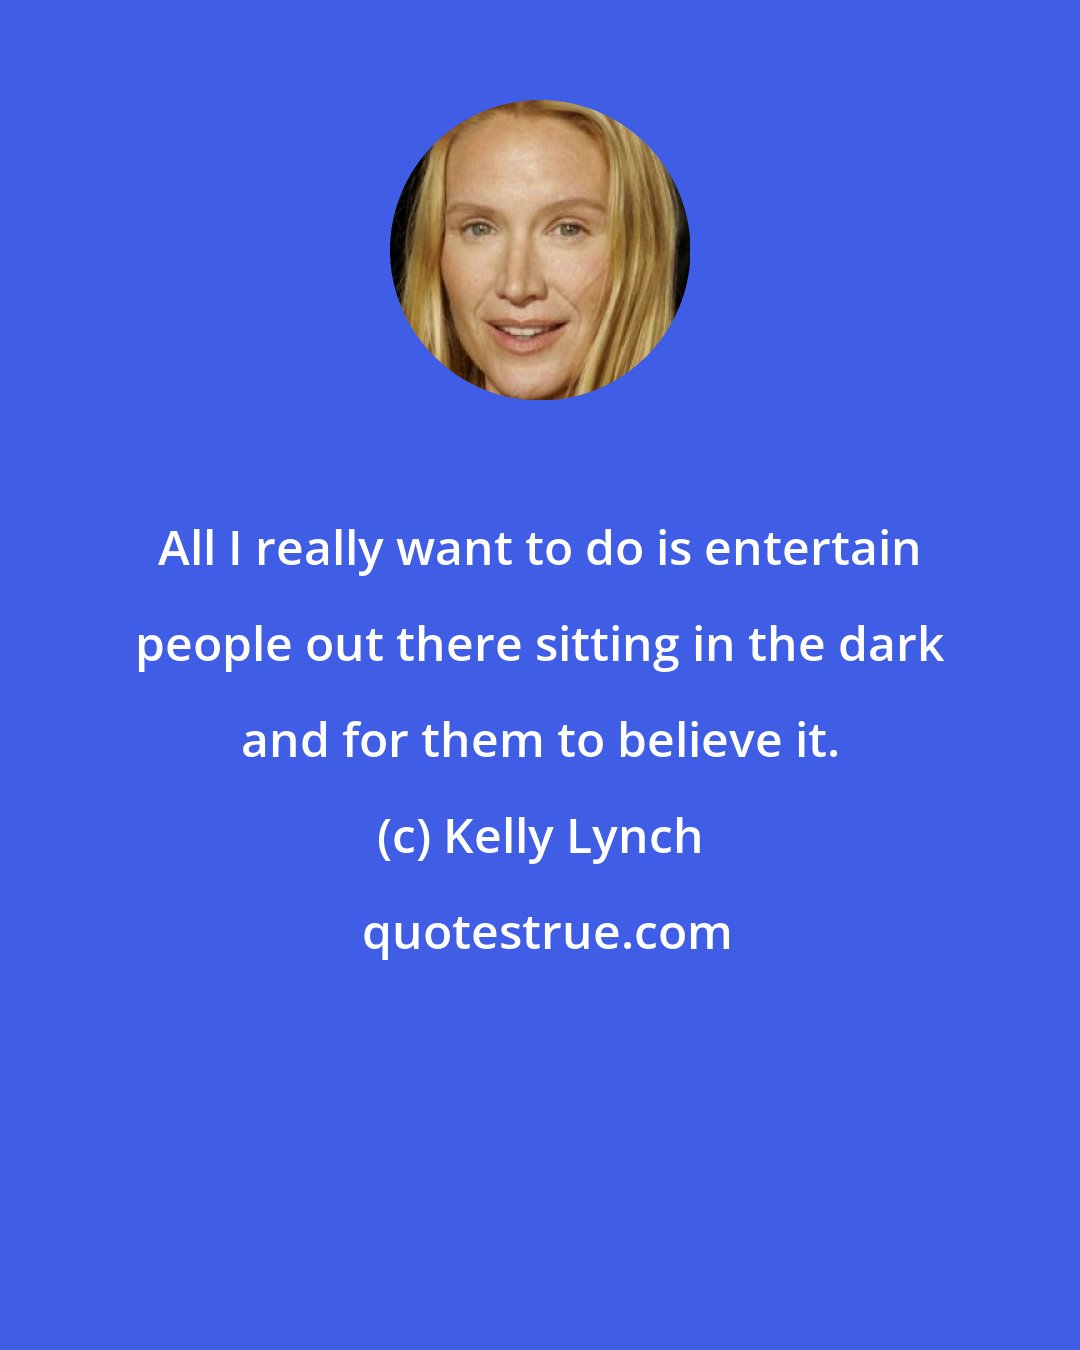 Kelly Lynch: All I really want to do is entertain people out there sitting in the dark and for them to believe it.